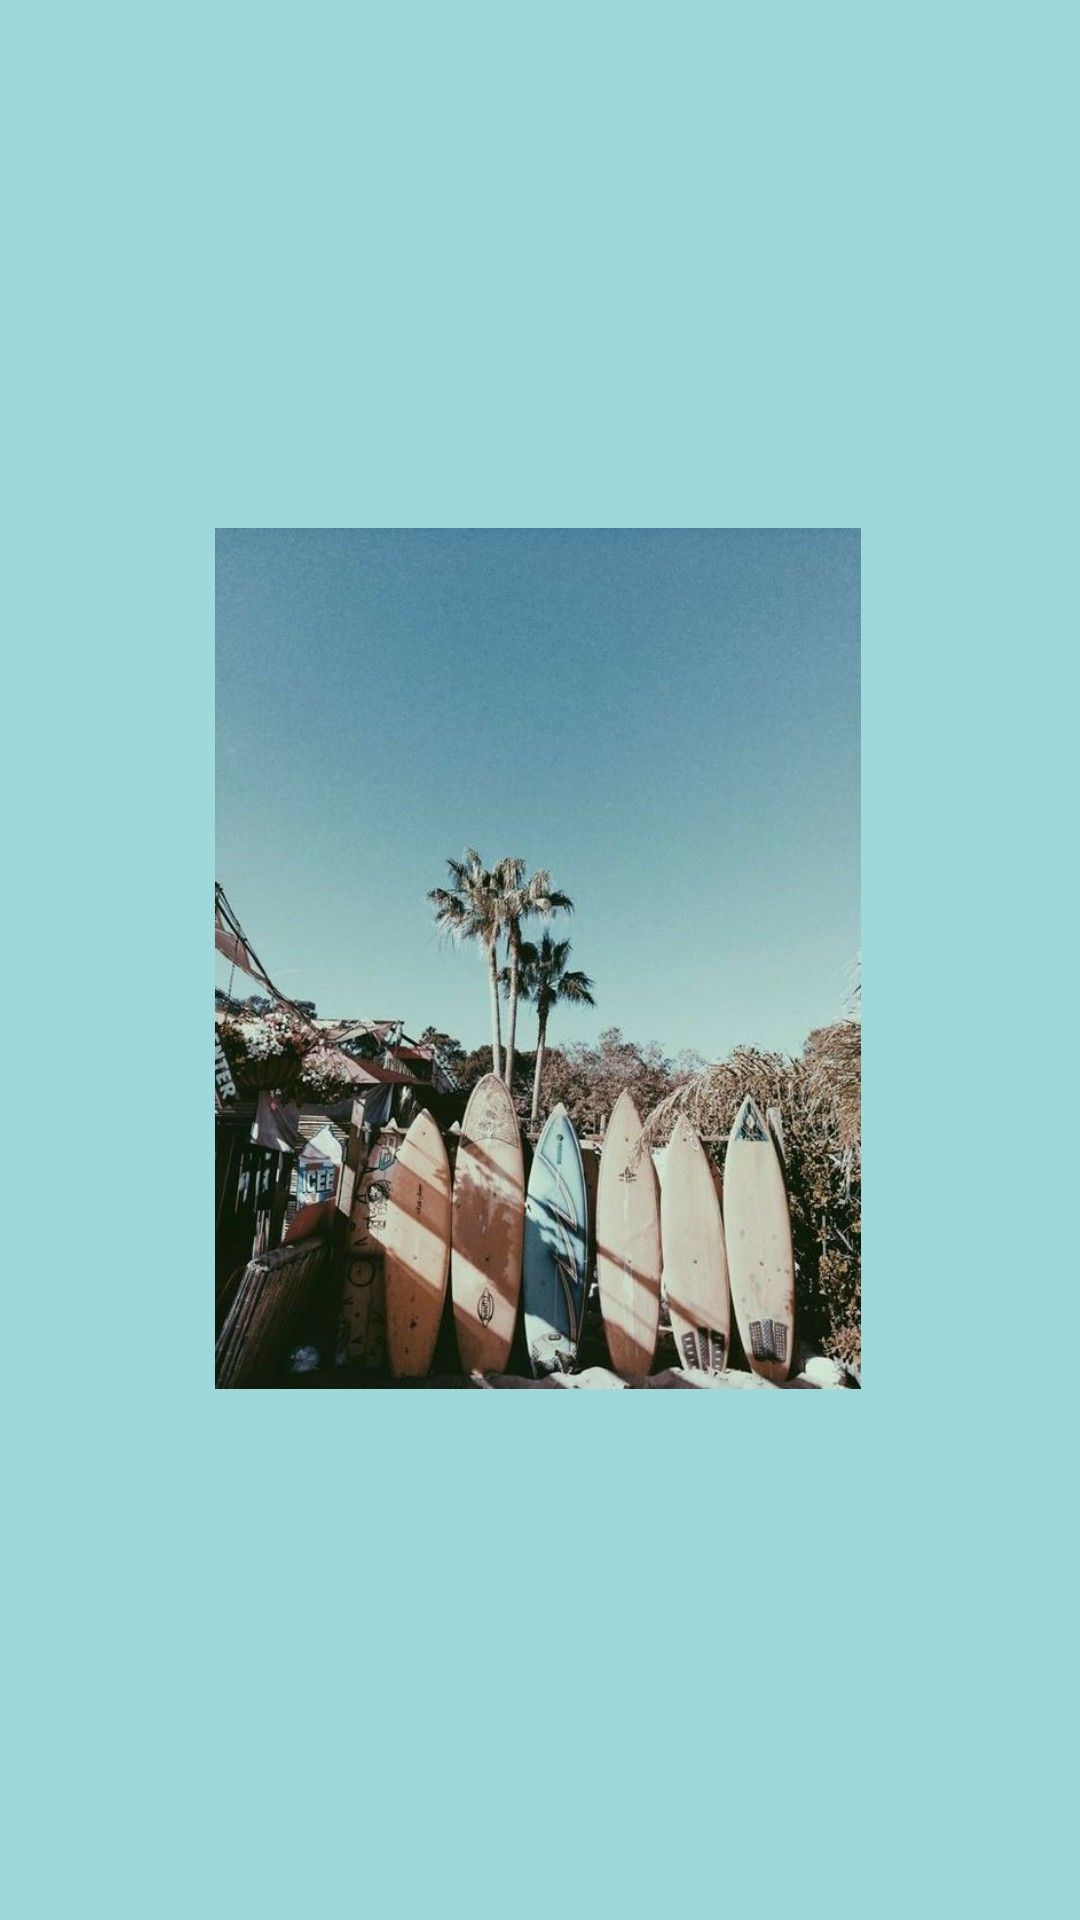 A row of surfboards lean against a wall, palm trees in the background. - Surf